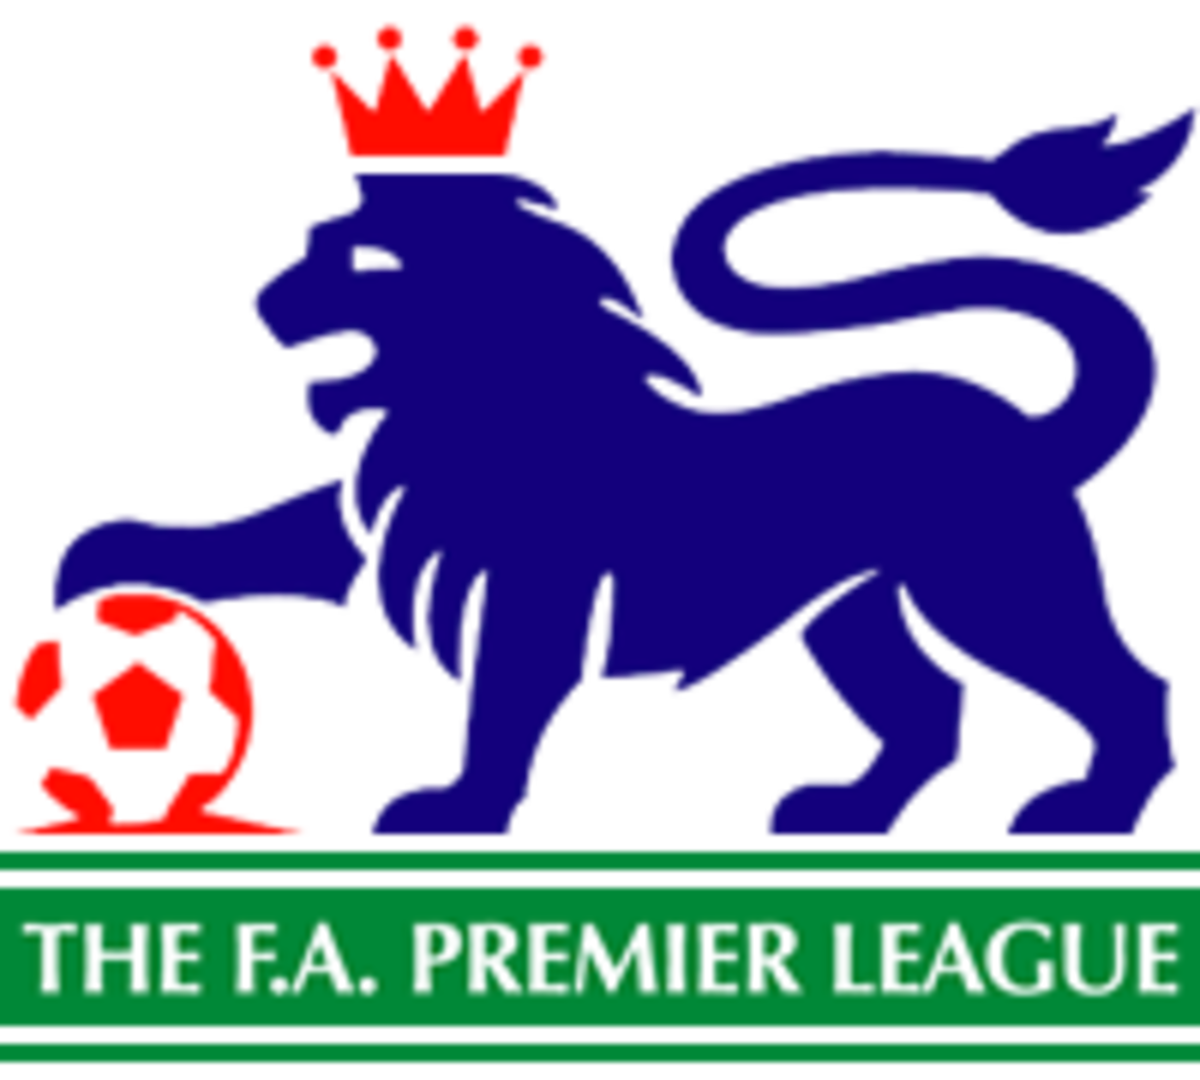 The new FA Premier League signalled the end of the old First Division that had existed since 1888, and marked the beginning of a whole new era in English football.